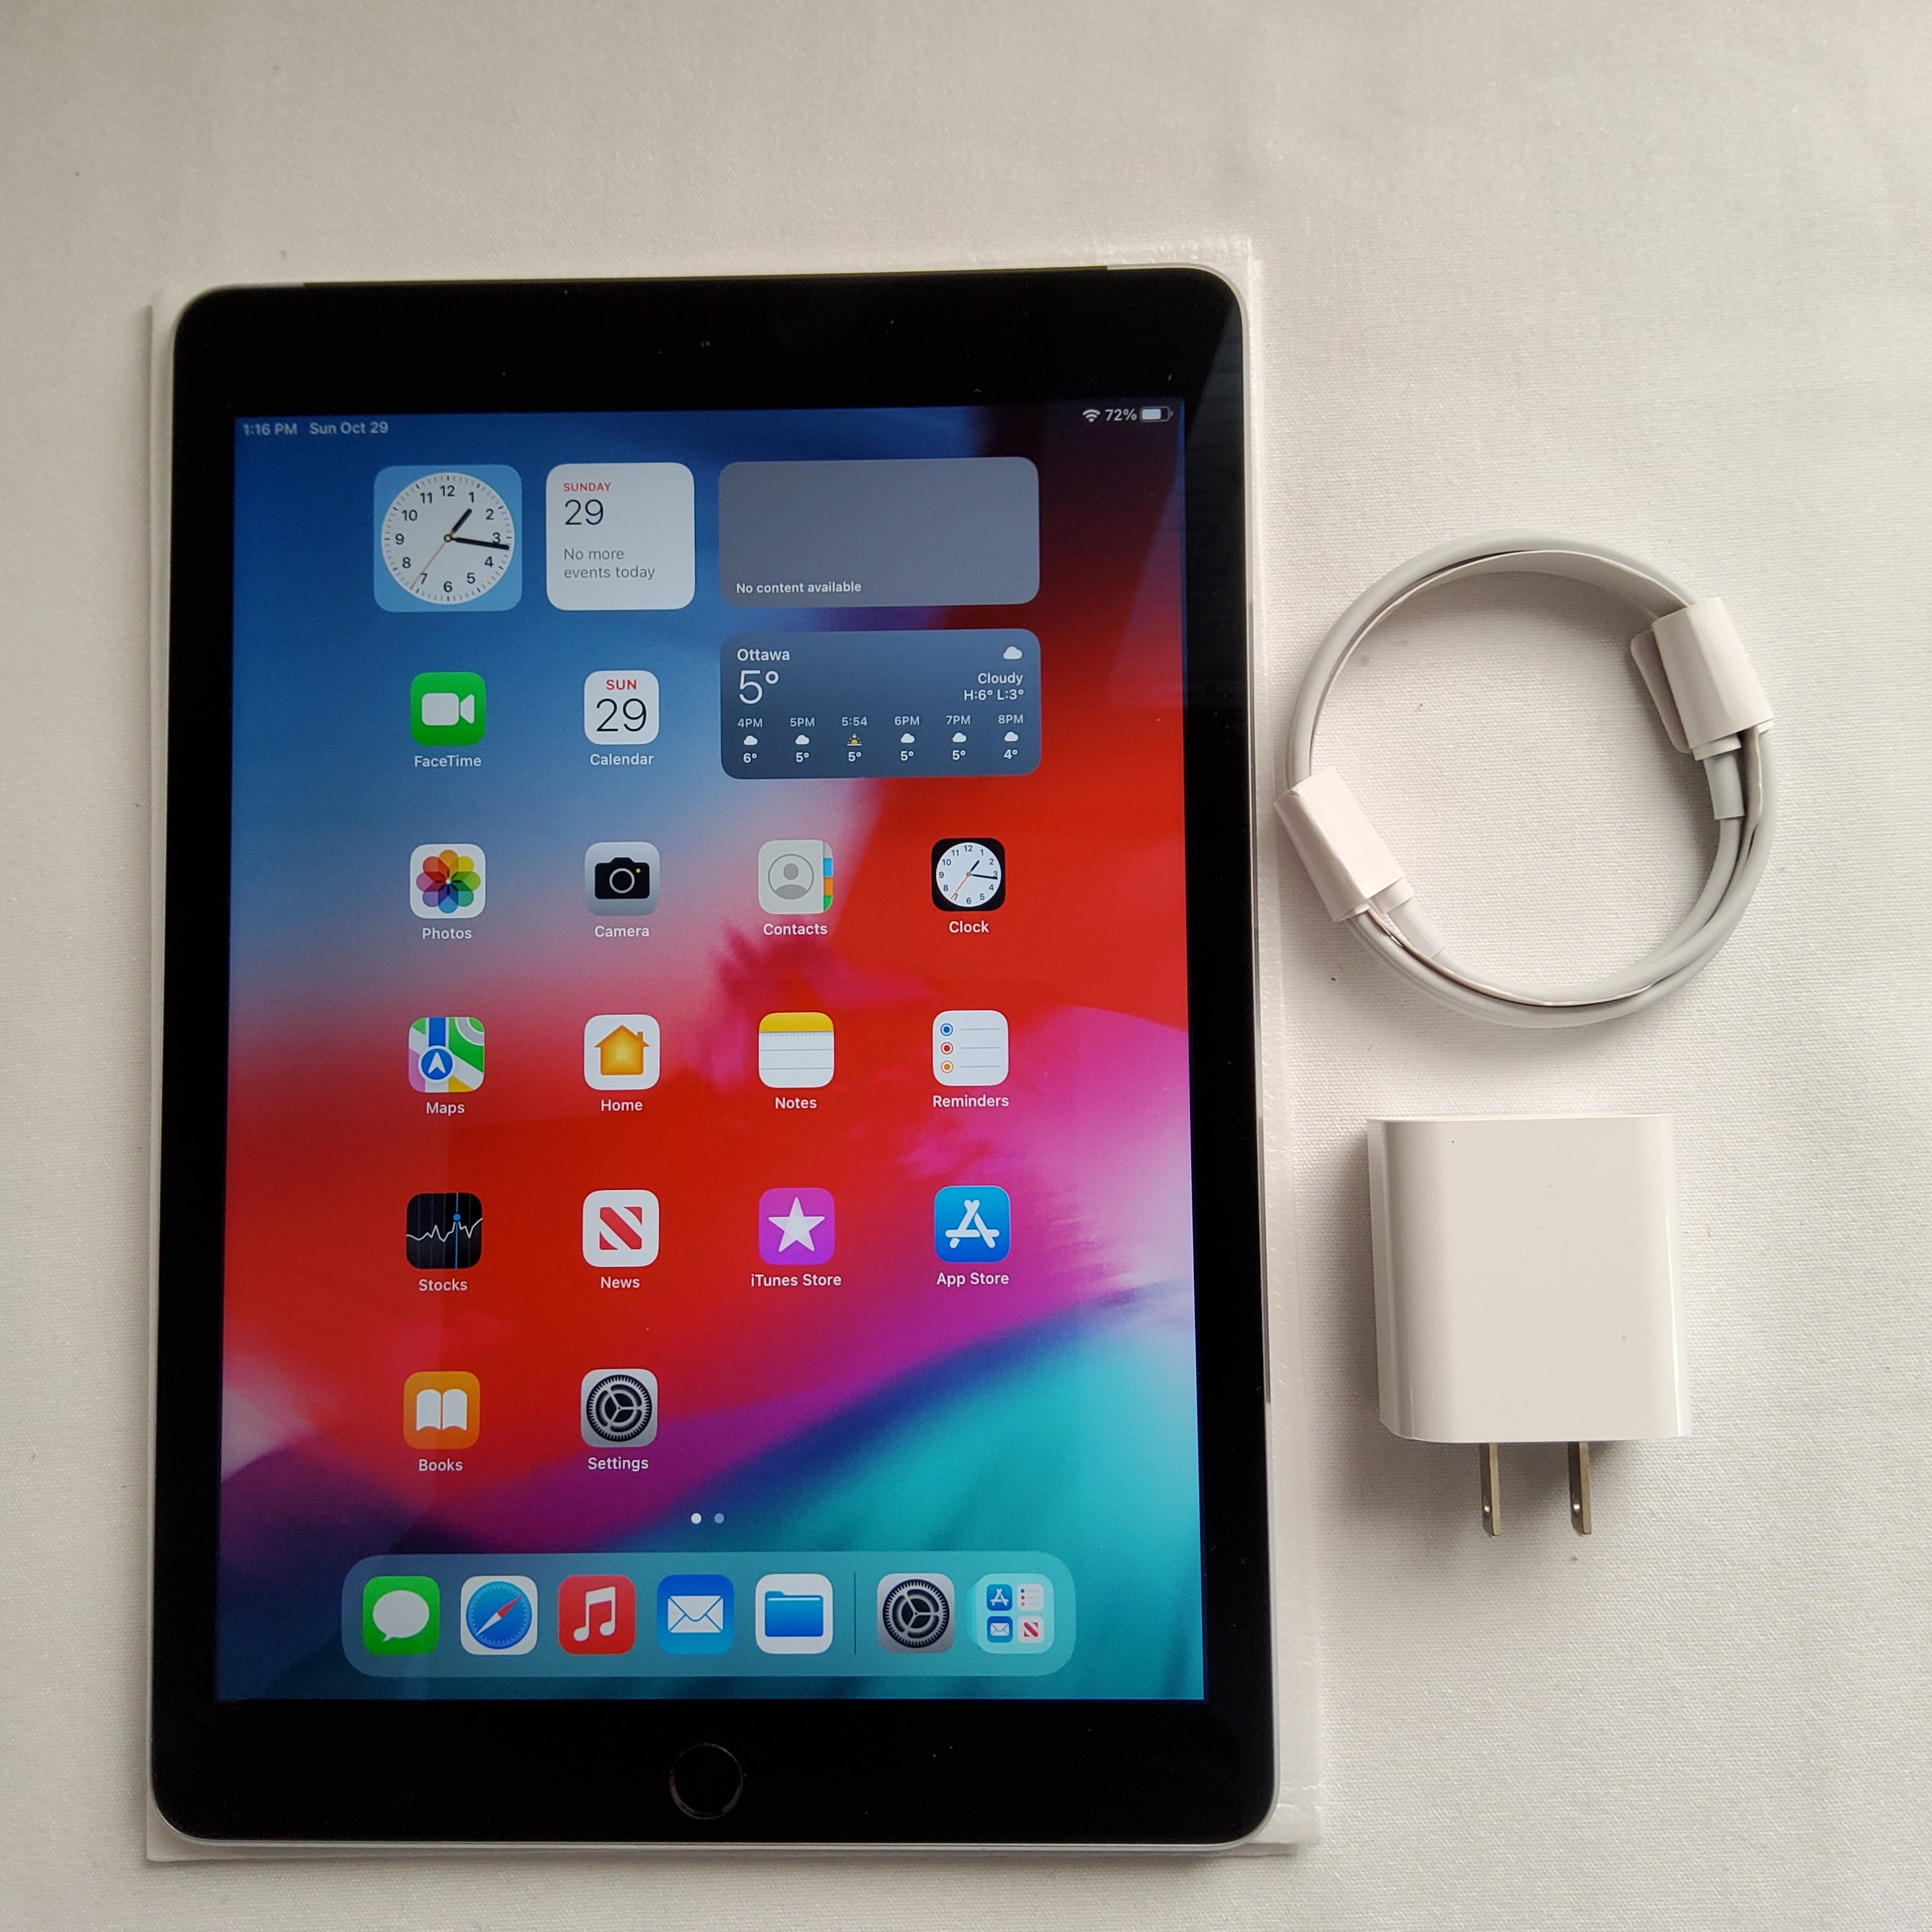 Authentic picture of  Black iPad Air 2 with its charger and cable next to it